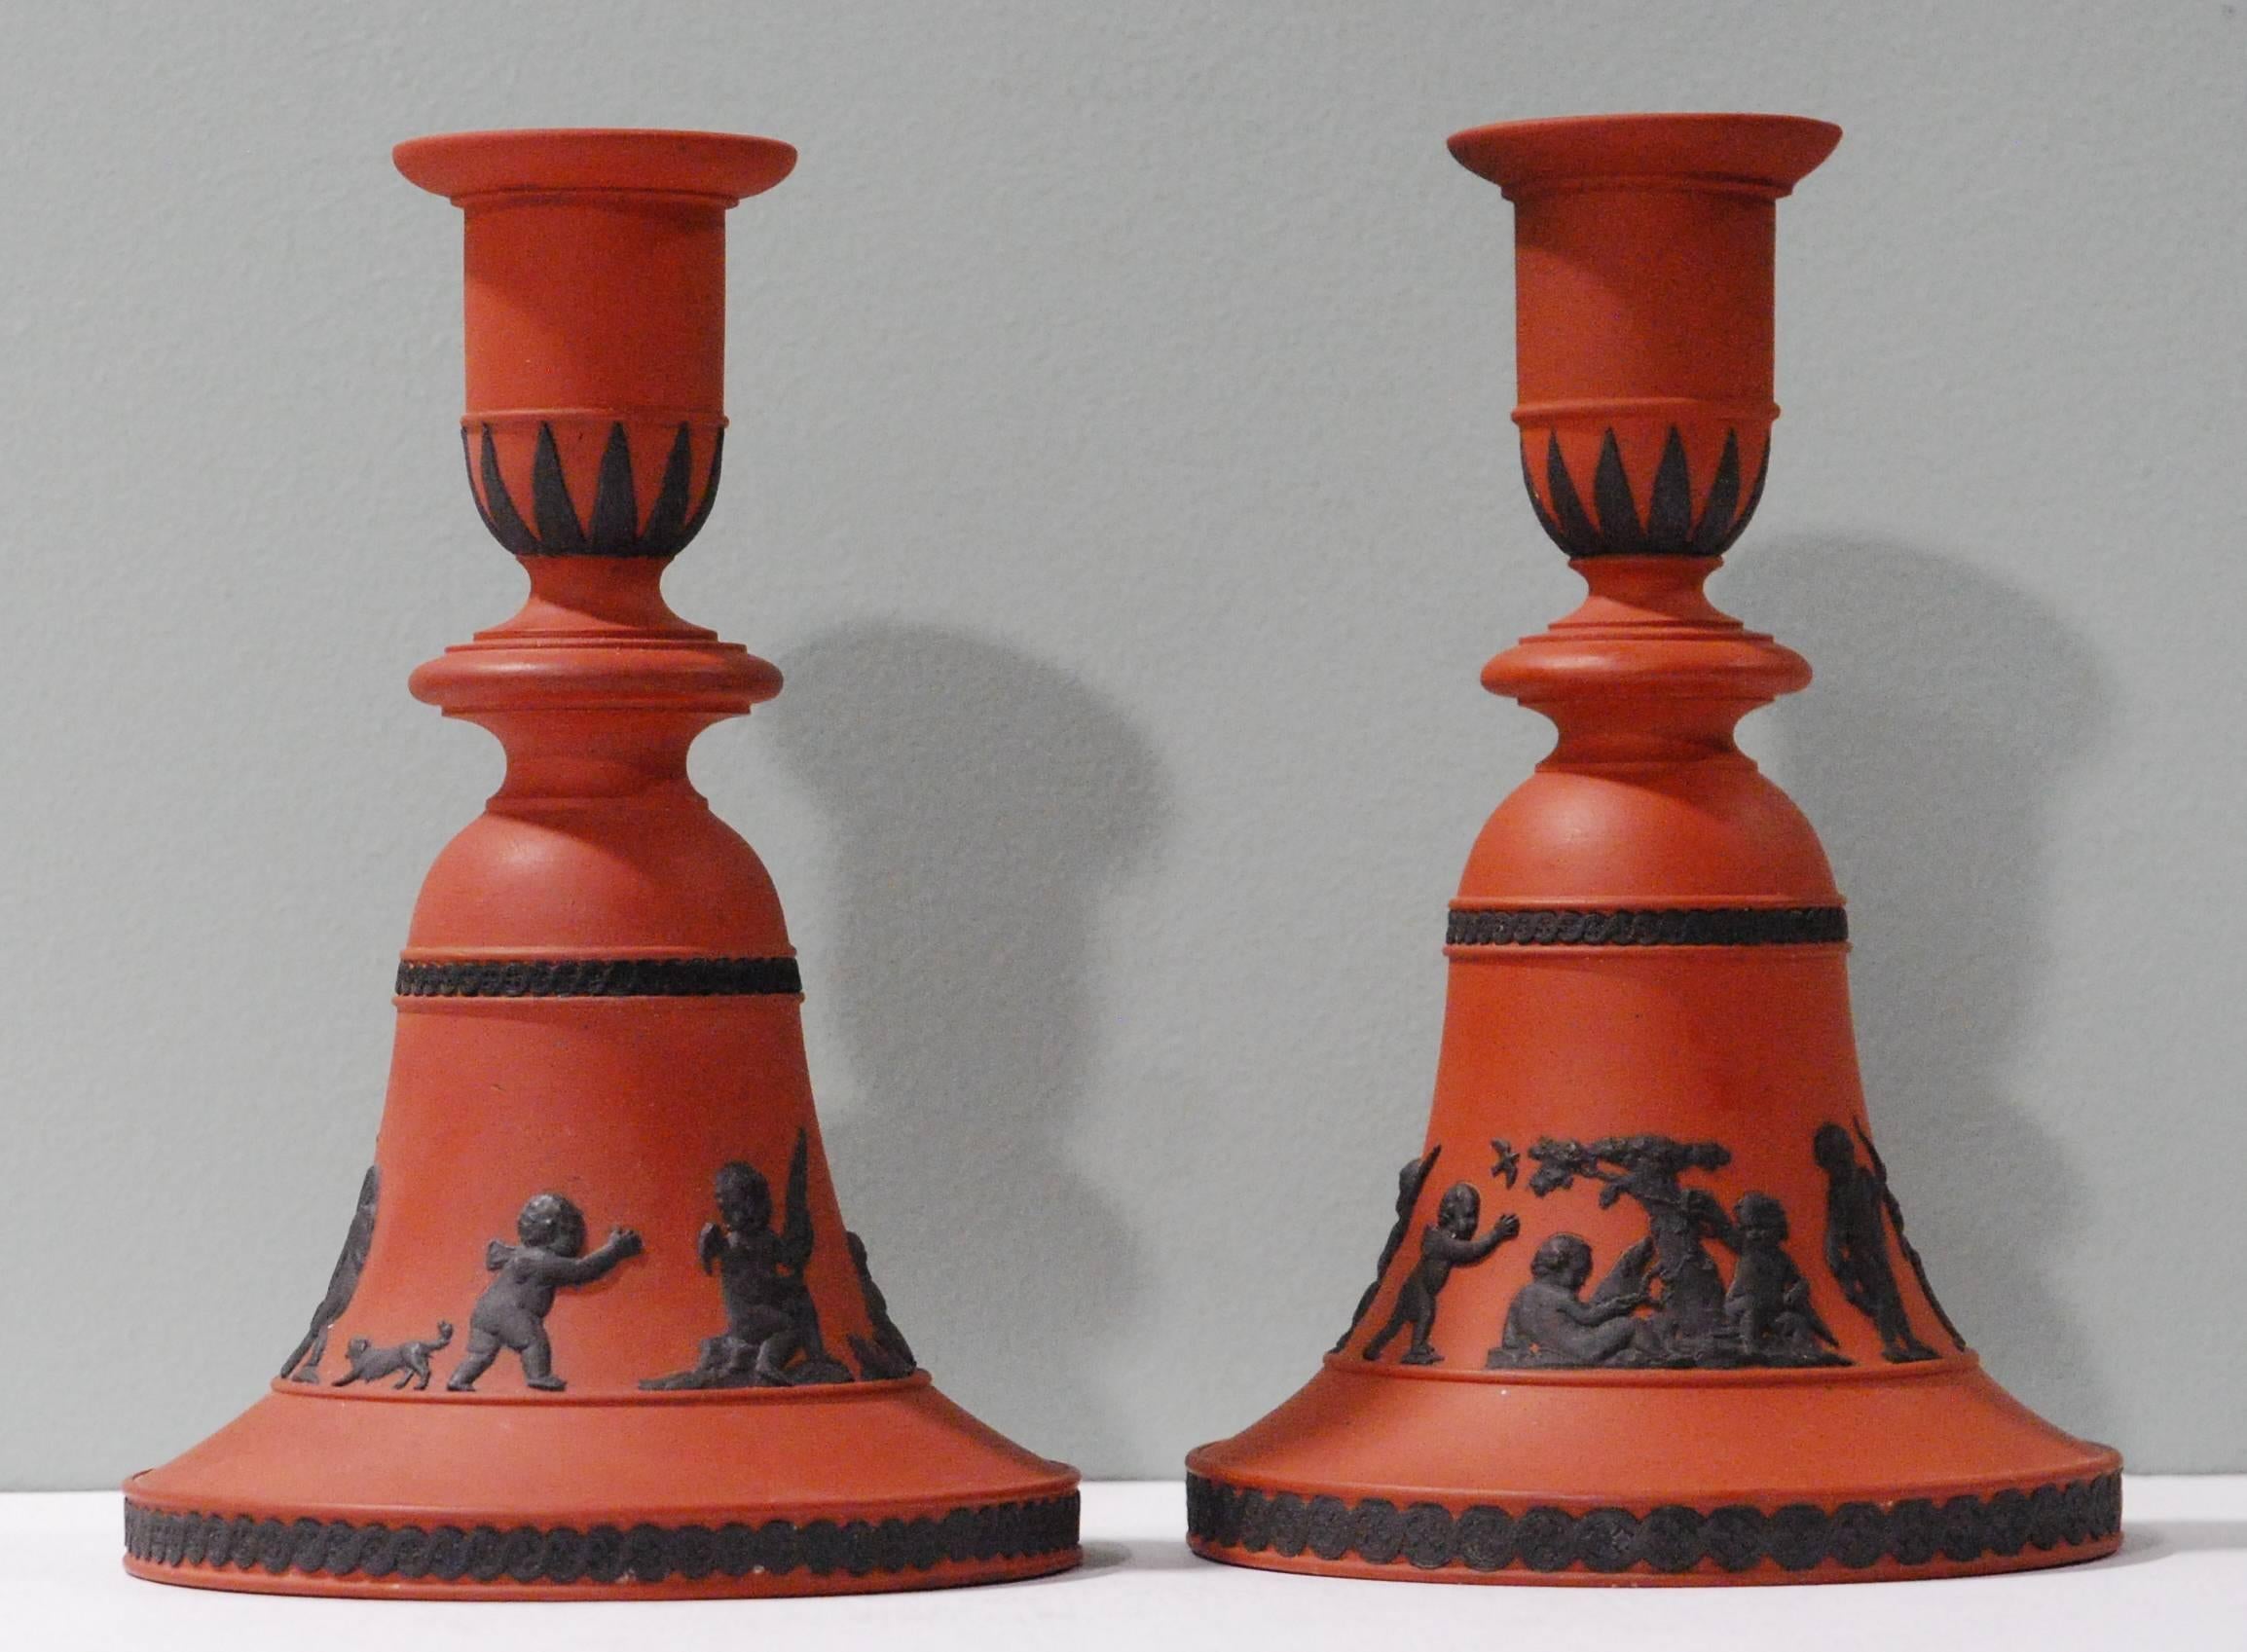 A rare pair of bell shaped candlesticks in rosso antico, with black decoration of ‘Boys at Play’.